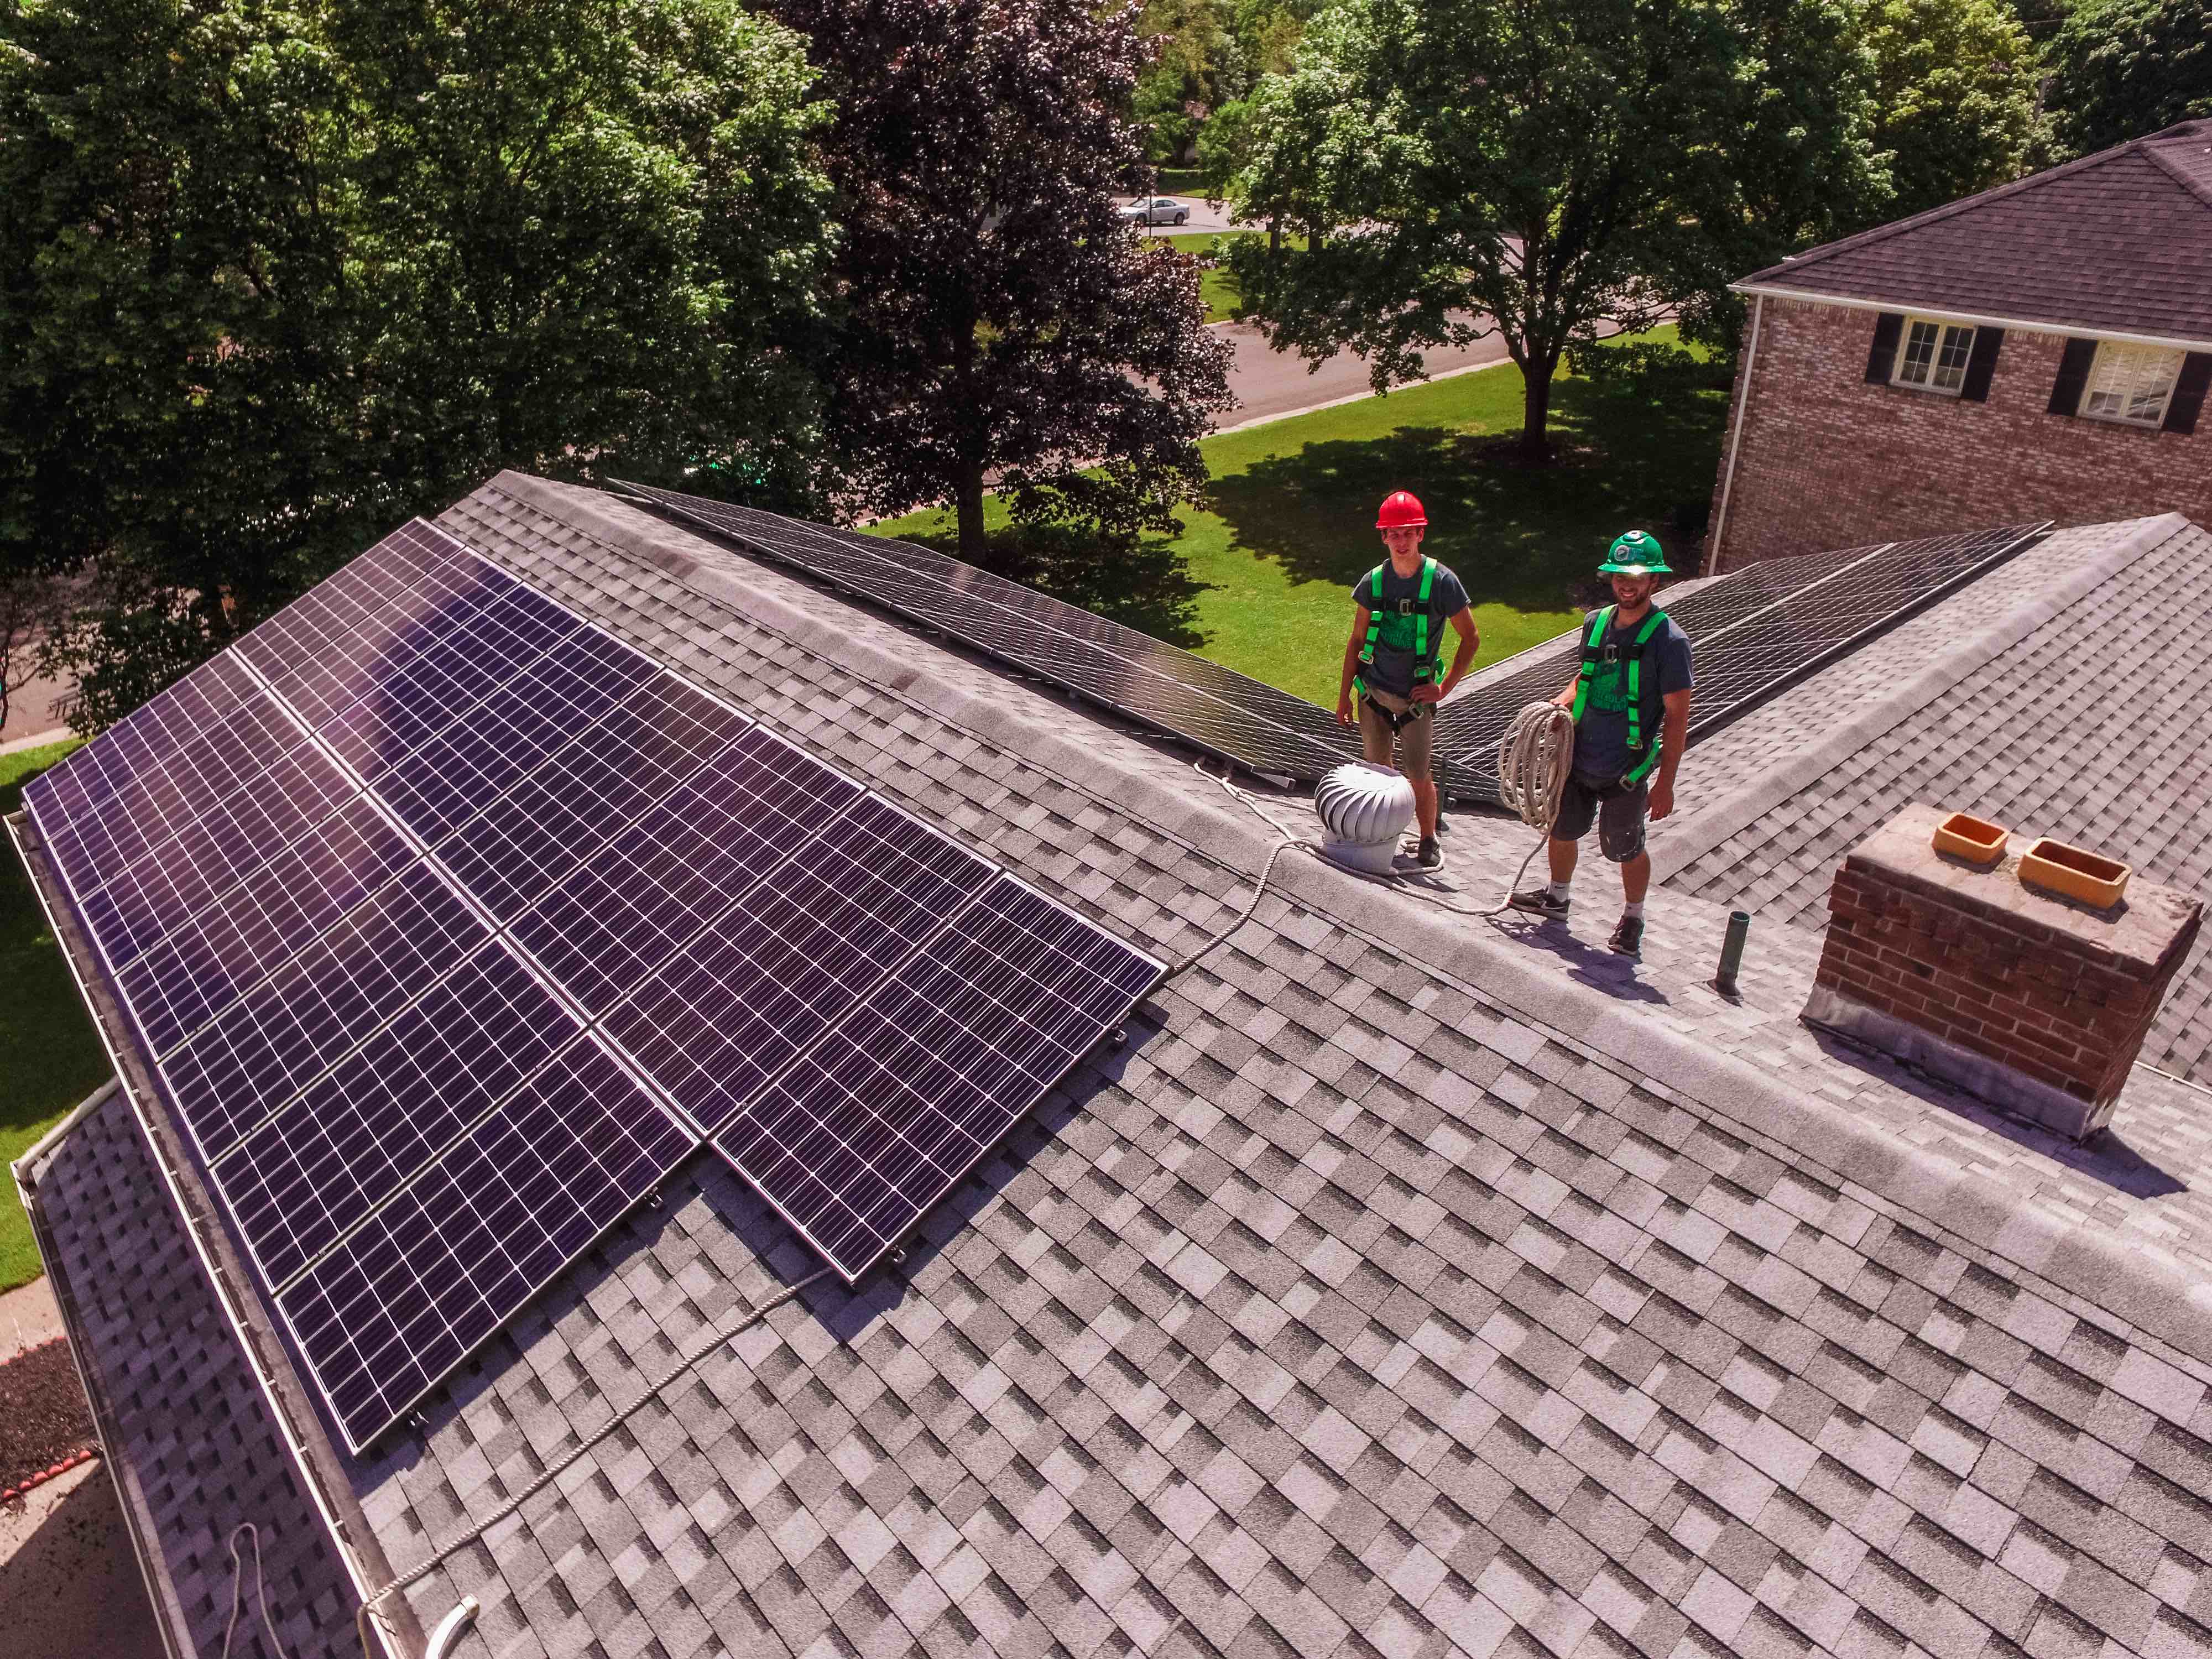 Personal service and education contribute to growth of the solar industry